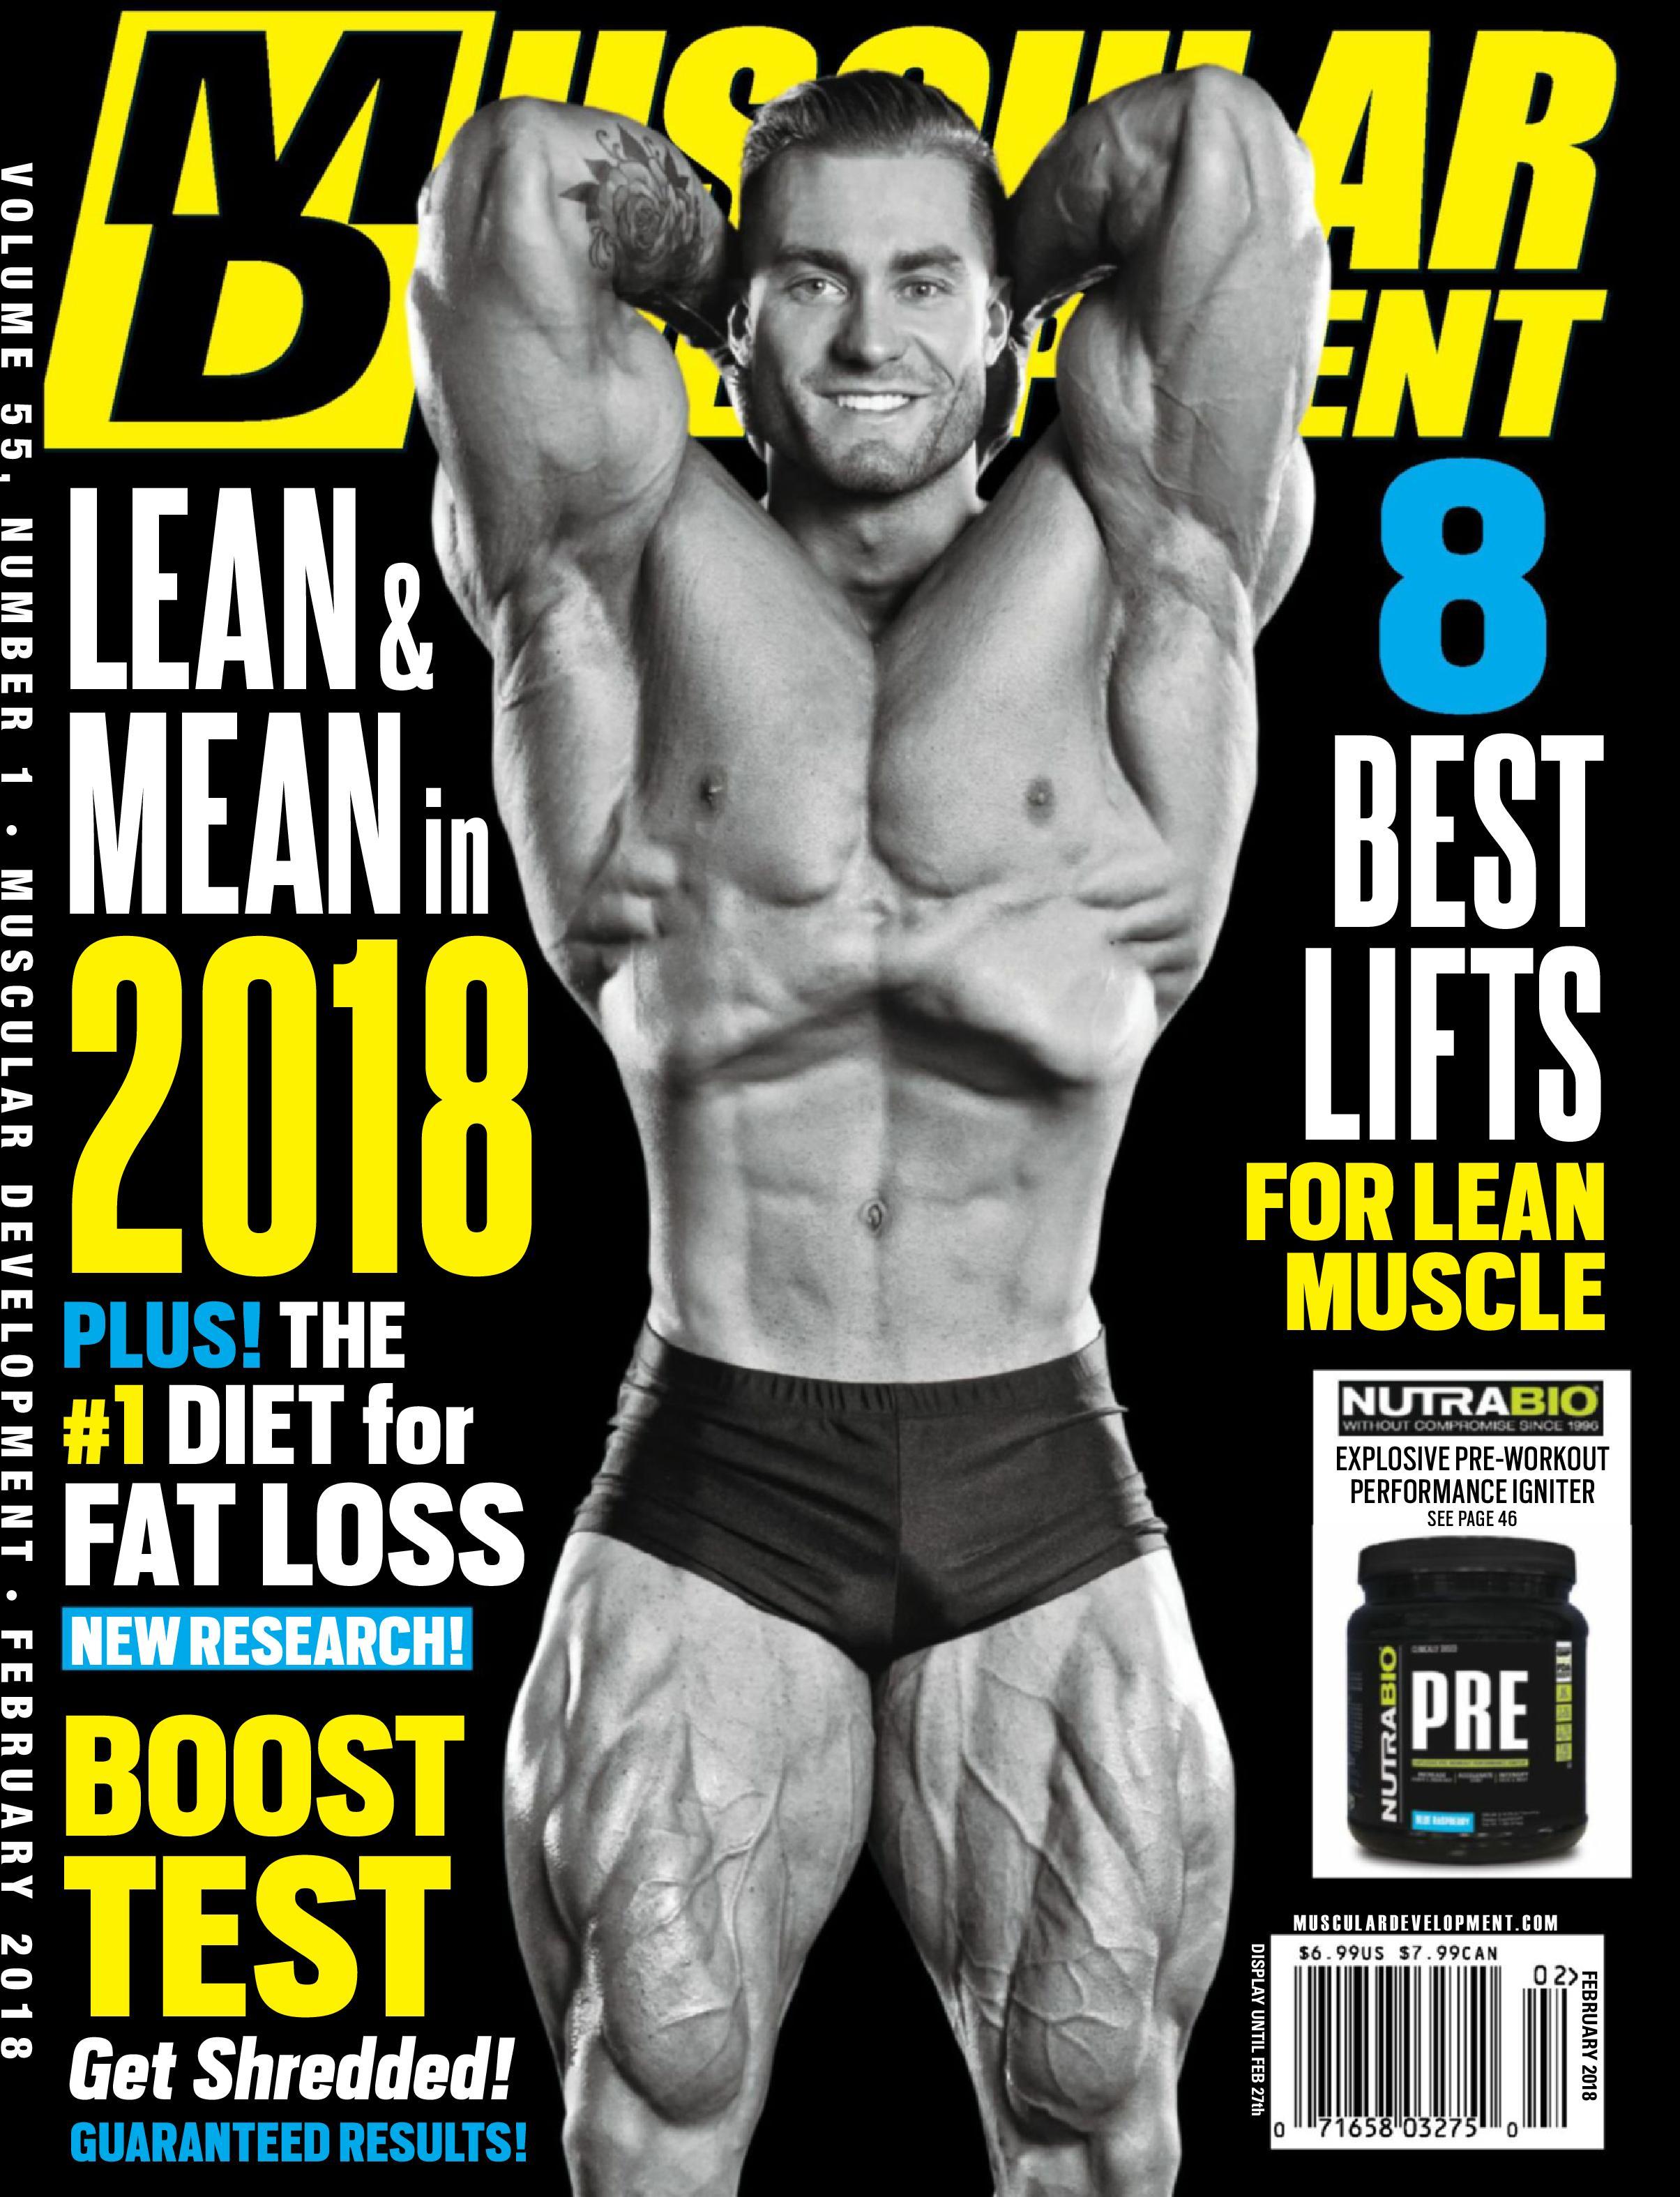 Christopher-Bumstead-on-muscular-development-cover-febbraio-2018